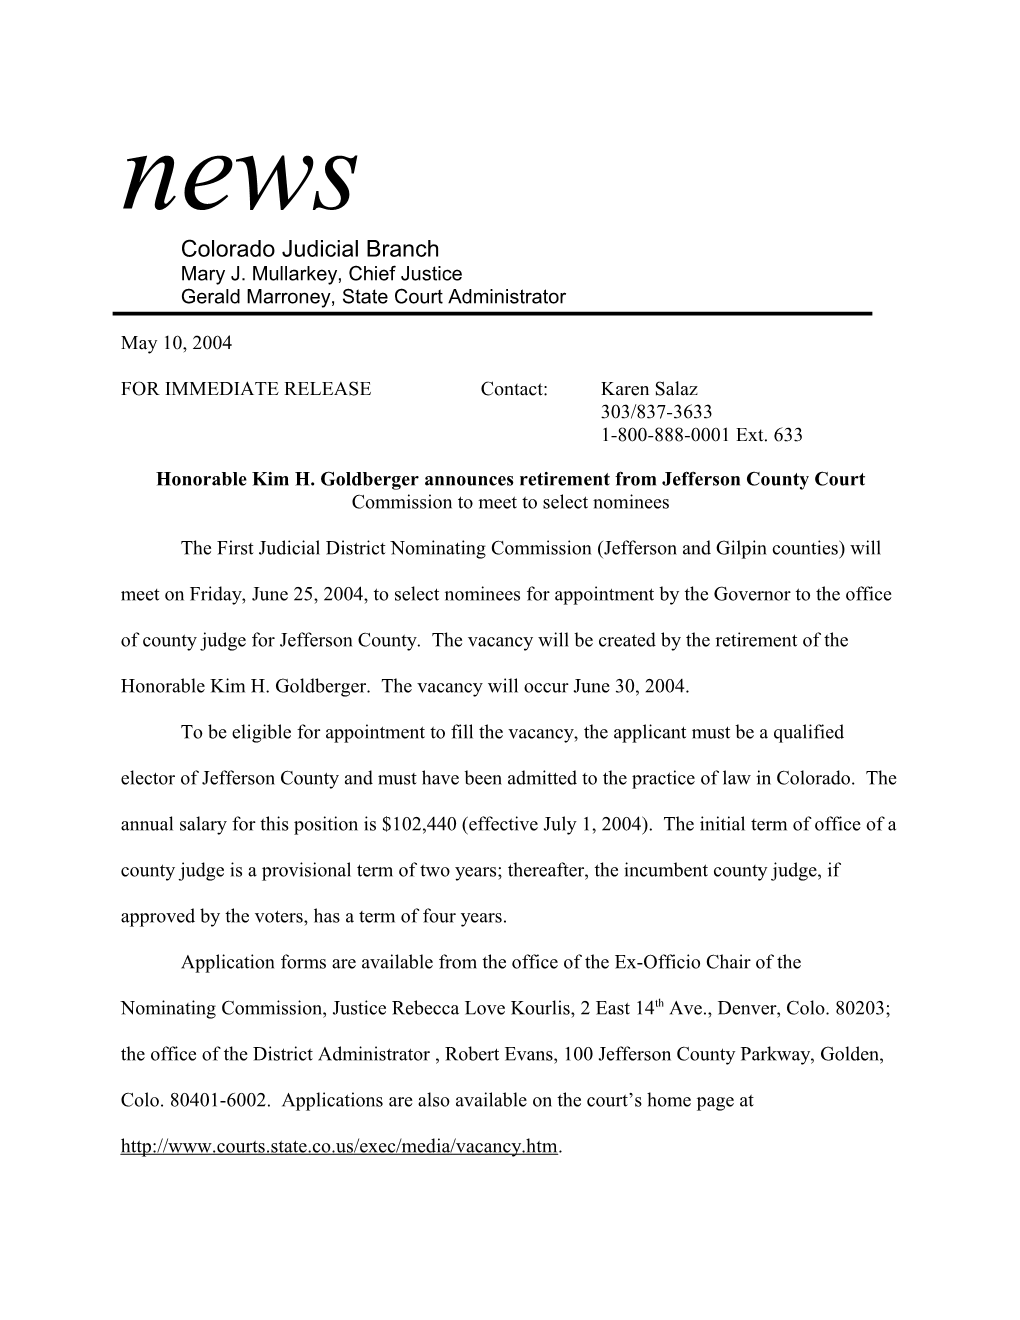 Honorable Kim H. Goldberger Announces Retirement from Jefferson County Court